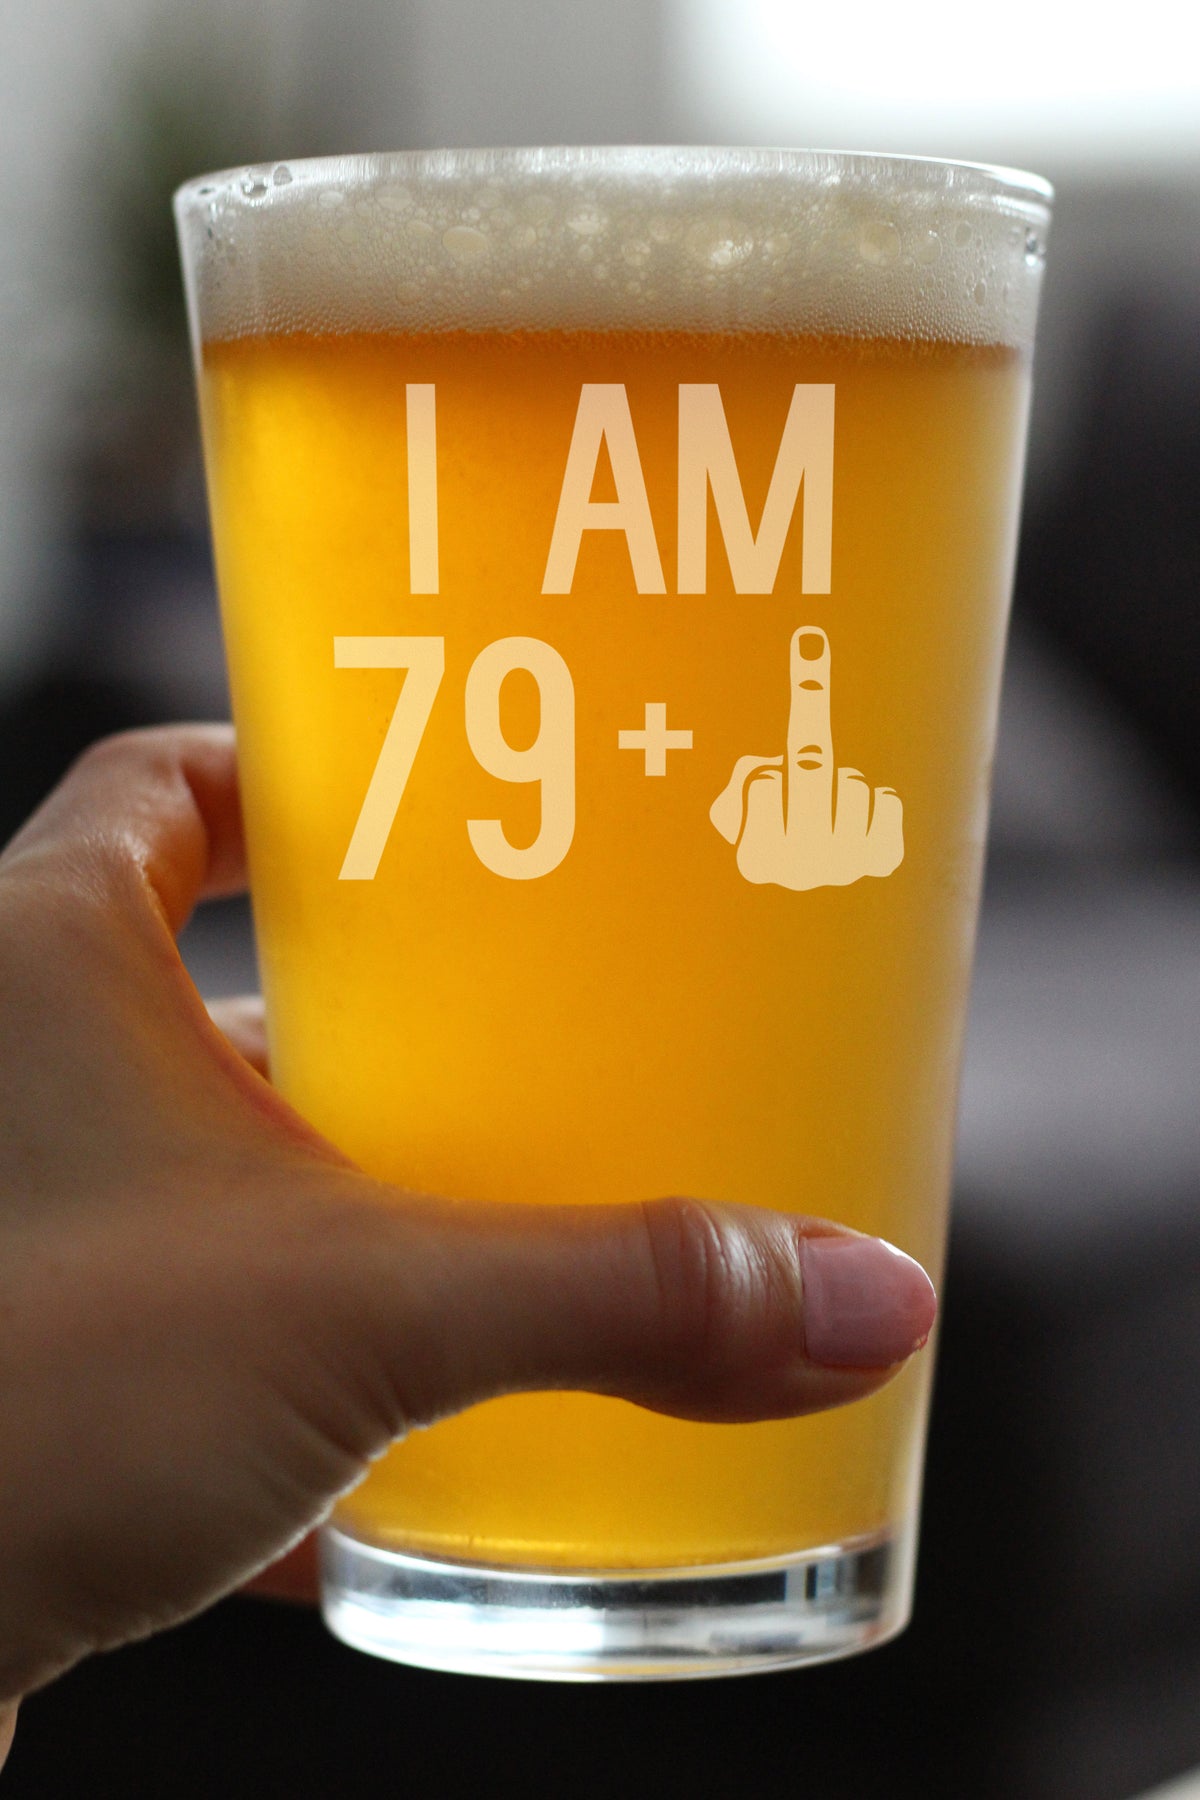 I Am 79 + 1 Middle Finger - 16 oz Pint Glass for Beer - Funny 80th Birthday Gifts for Men or Women Turning 80